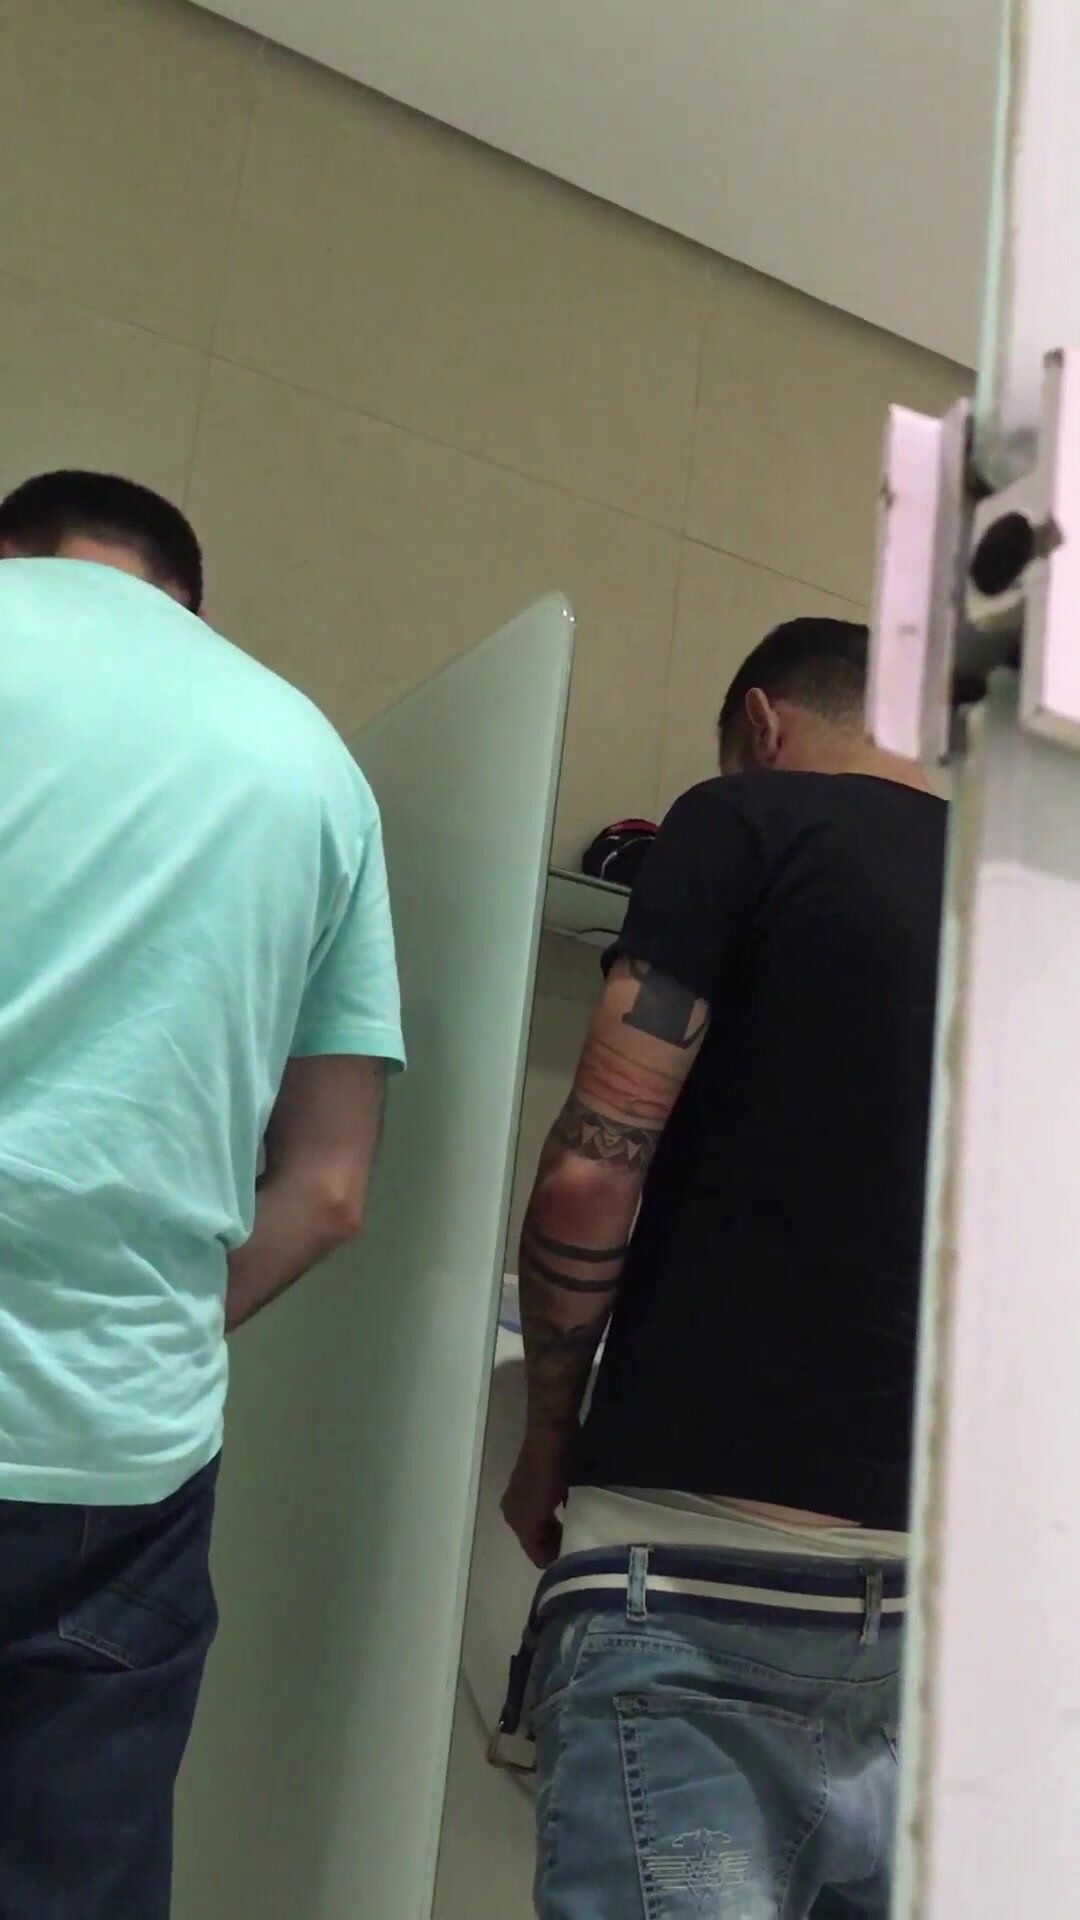 Two dudes playing in the urinals